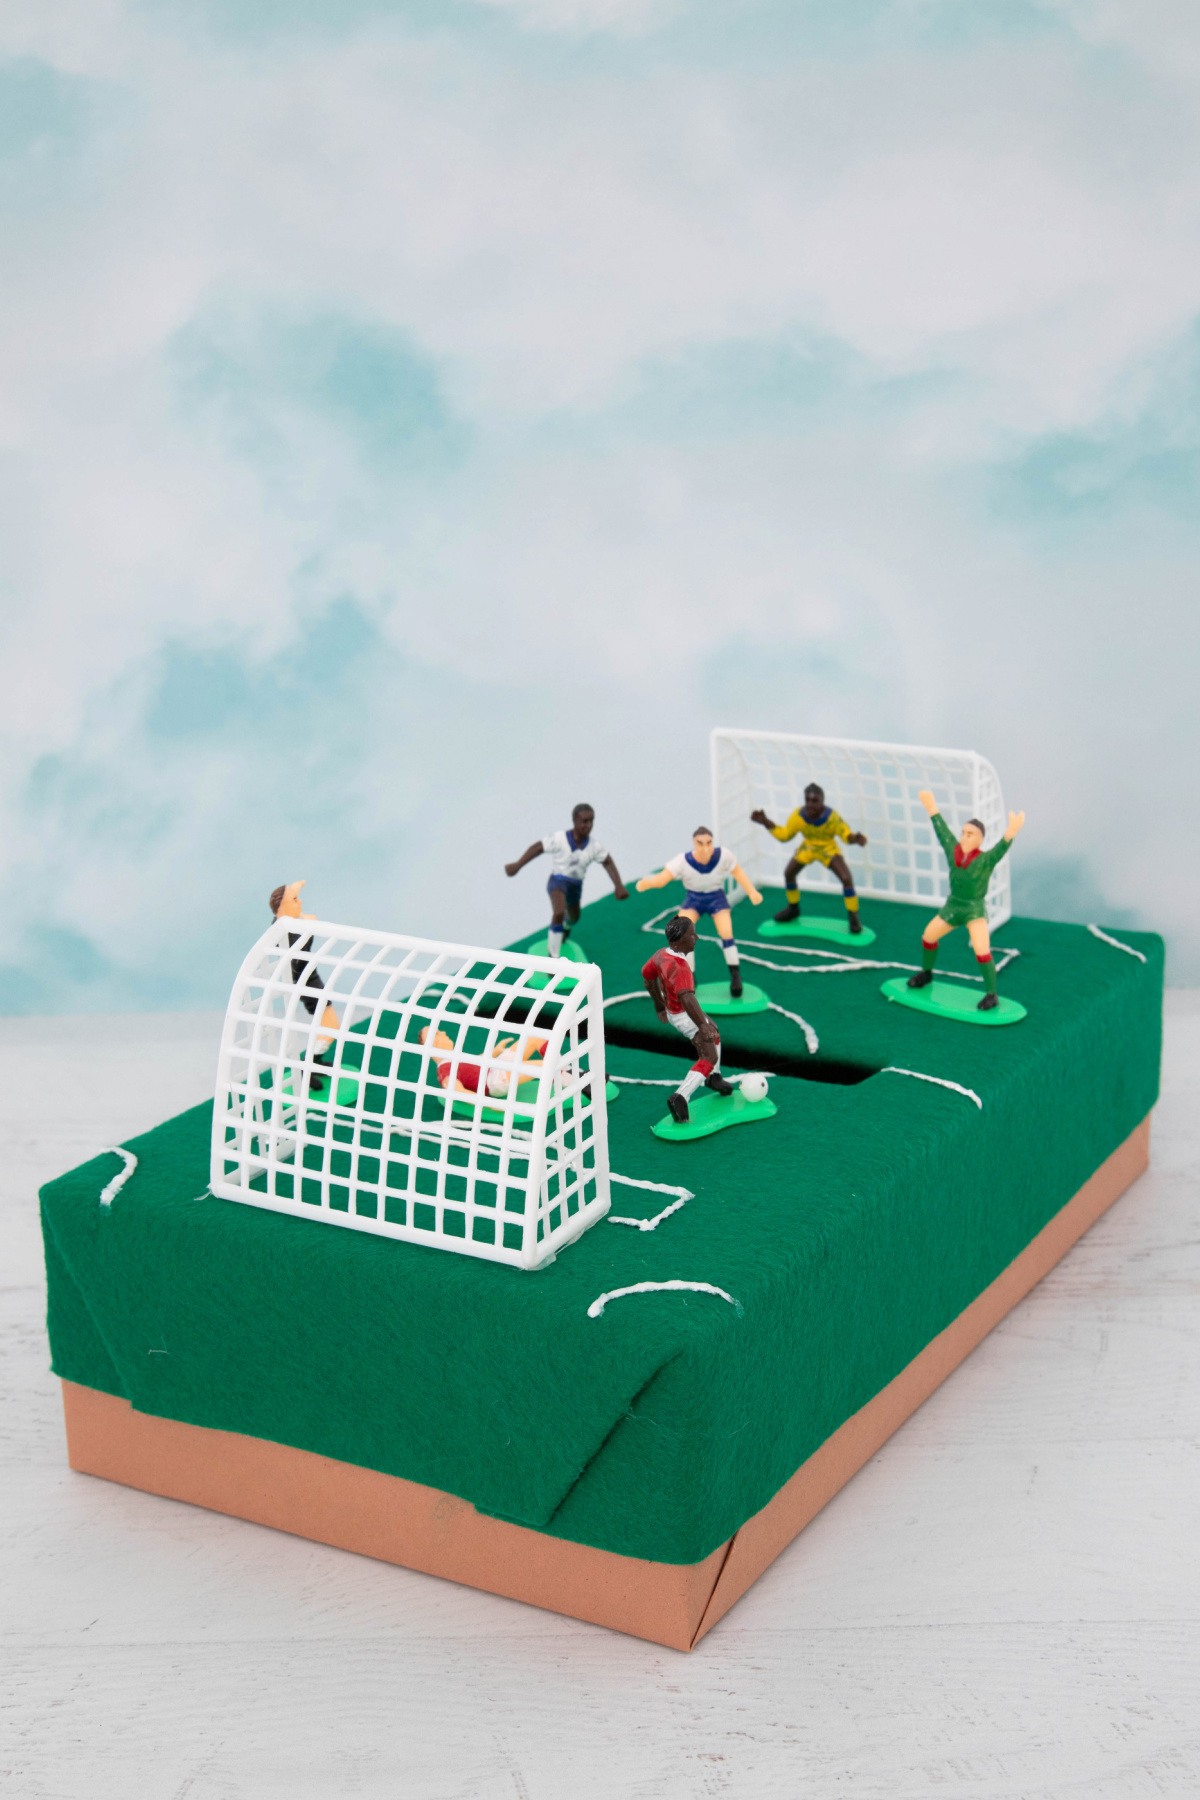 A box with soccer figurines on a green field.